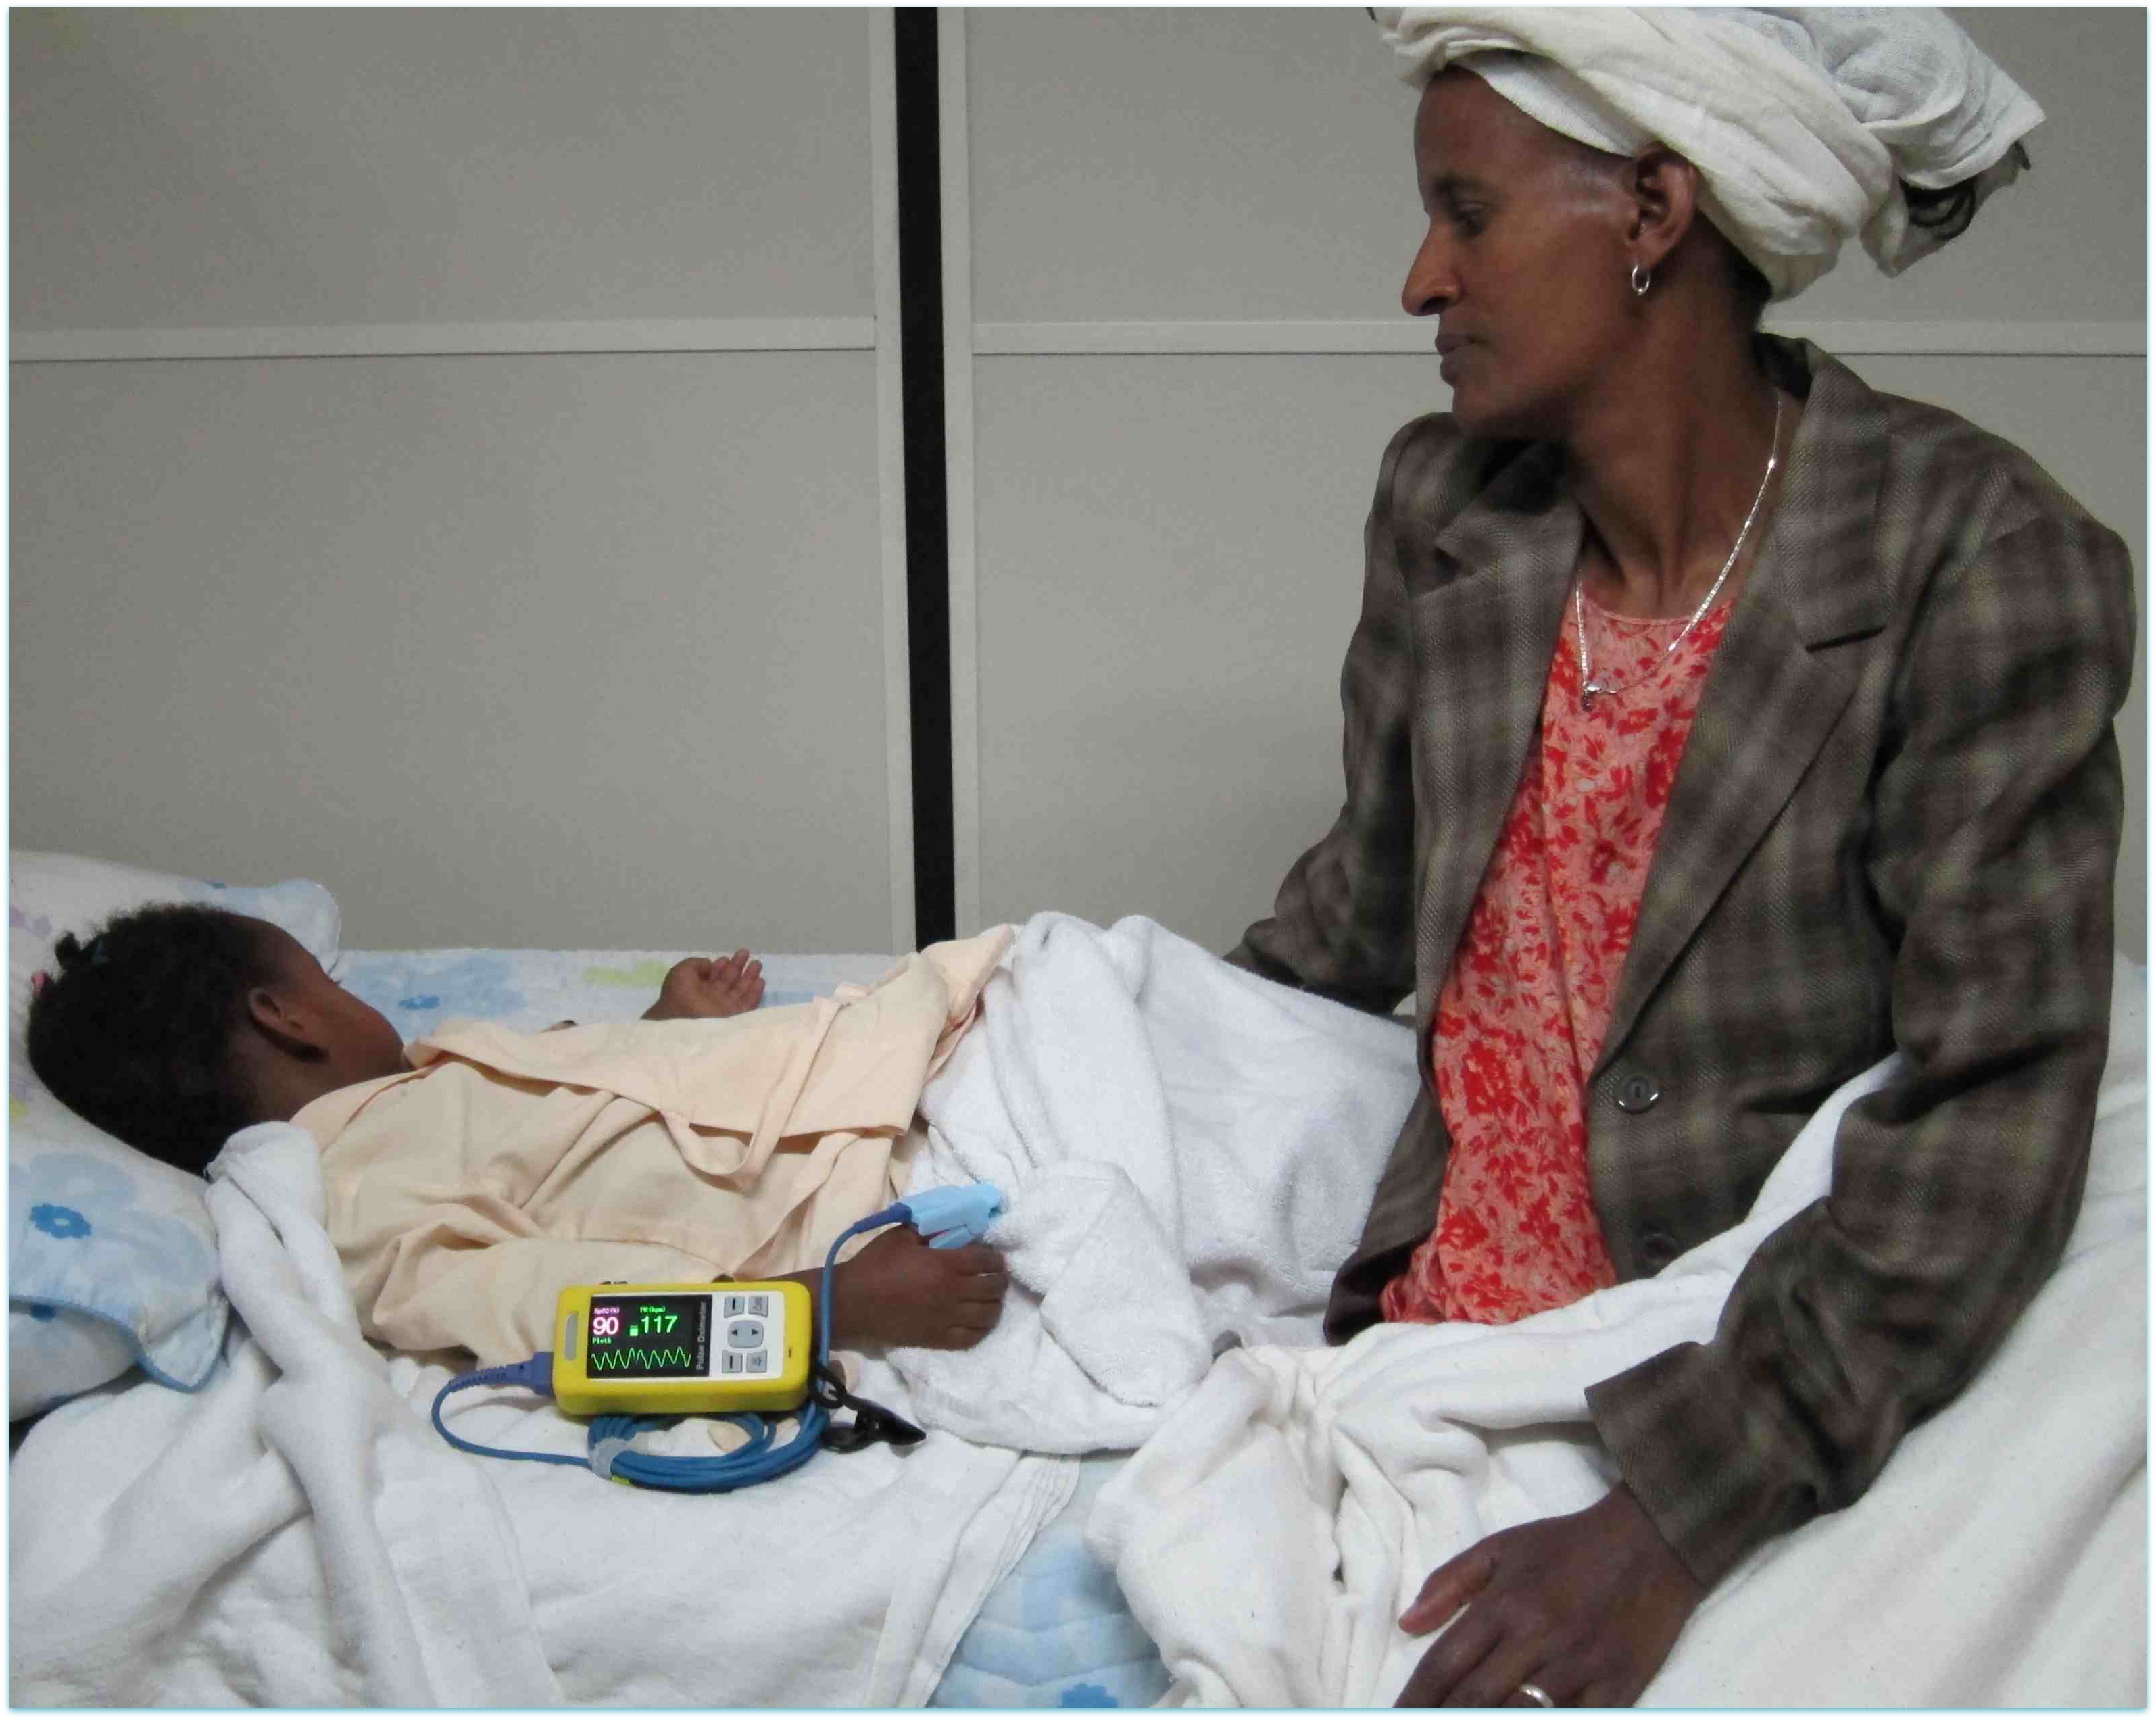 AAGBI donation, Black Lion, Addis_2011_Ethiopia_chain of hope (11)_oximetry patient